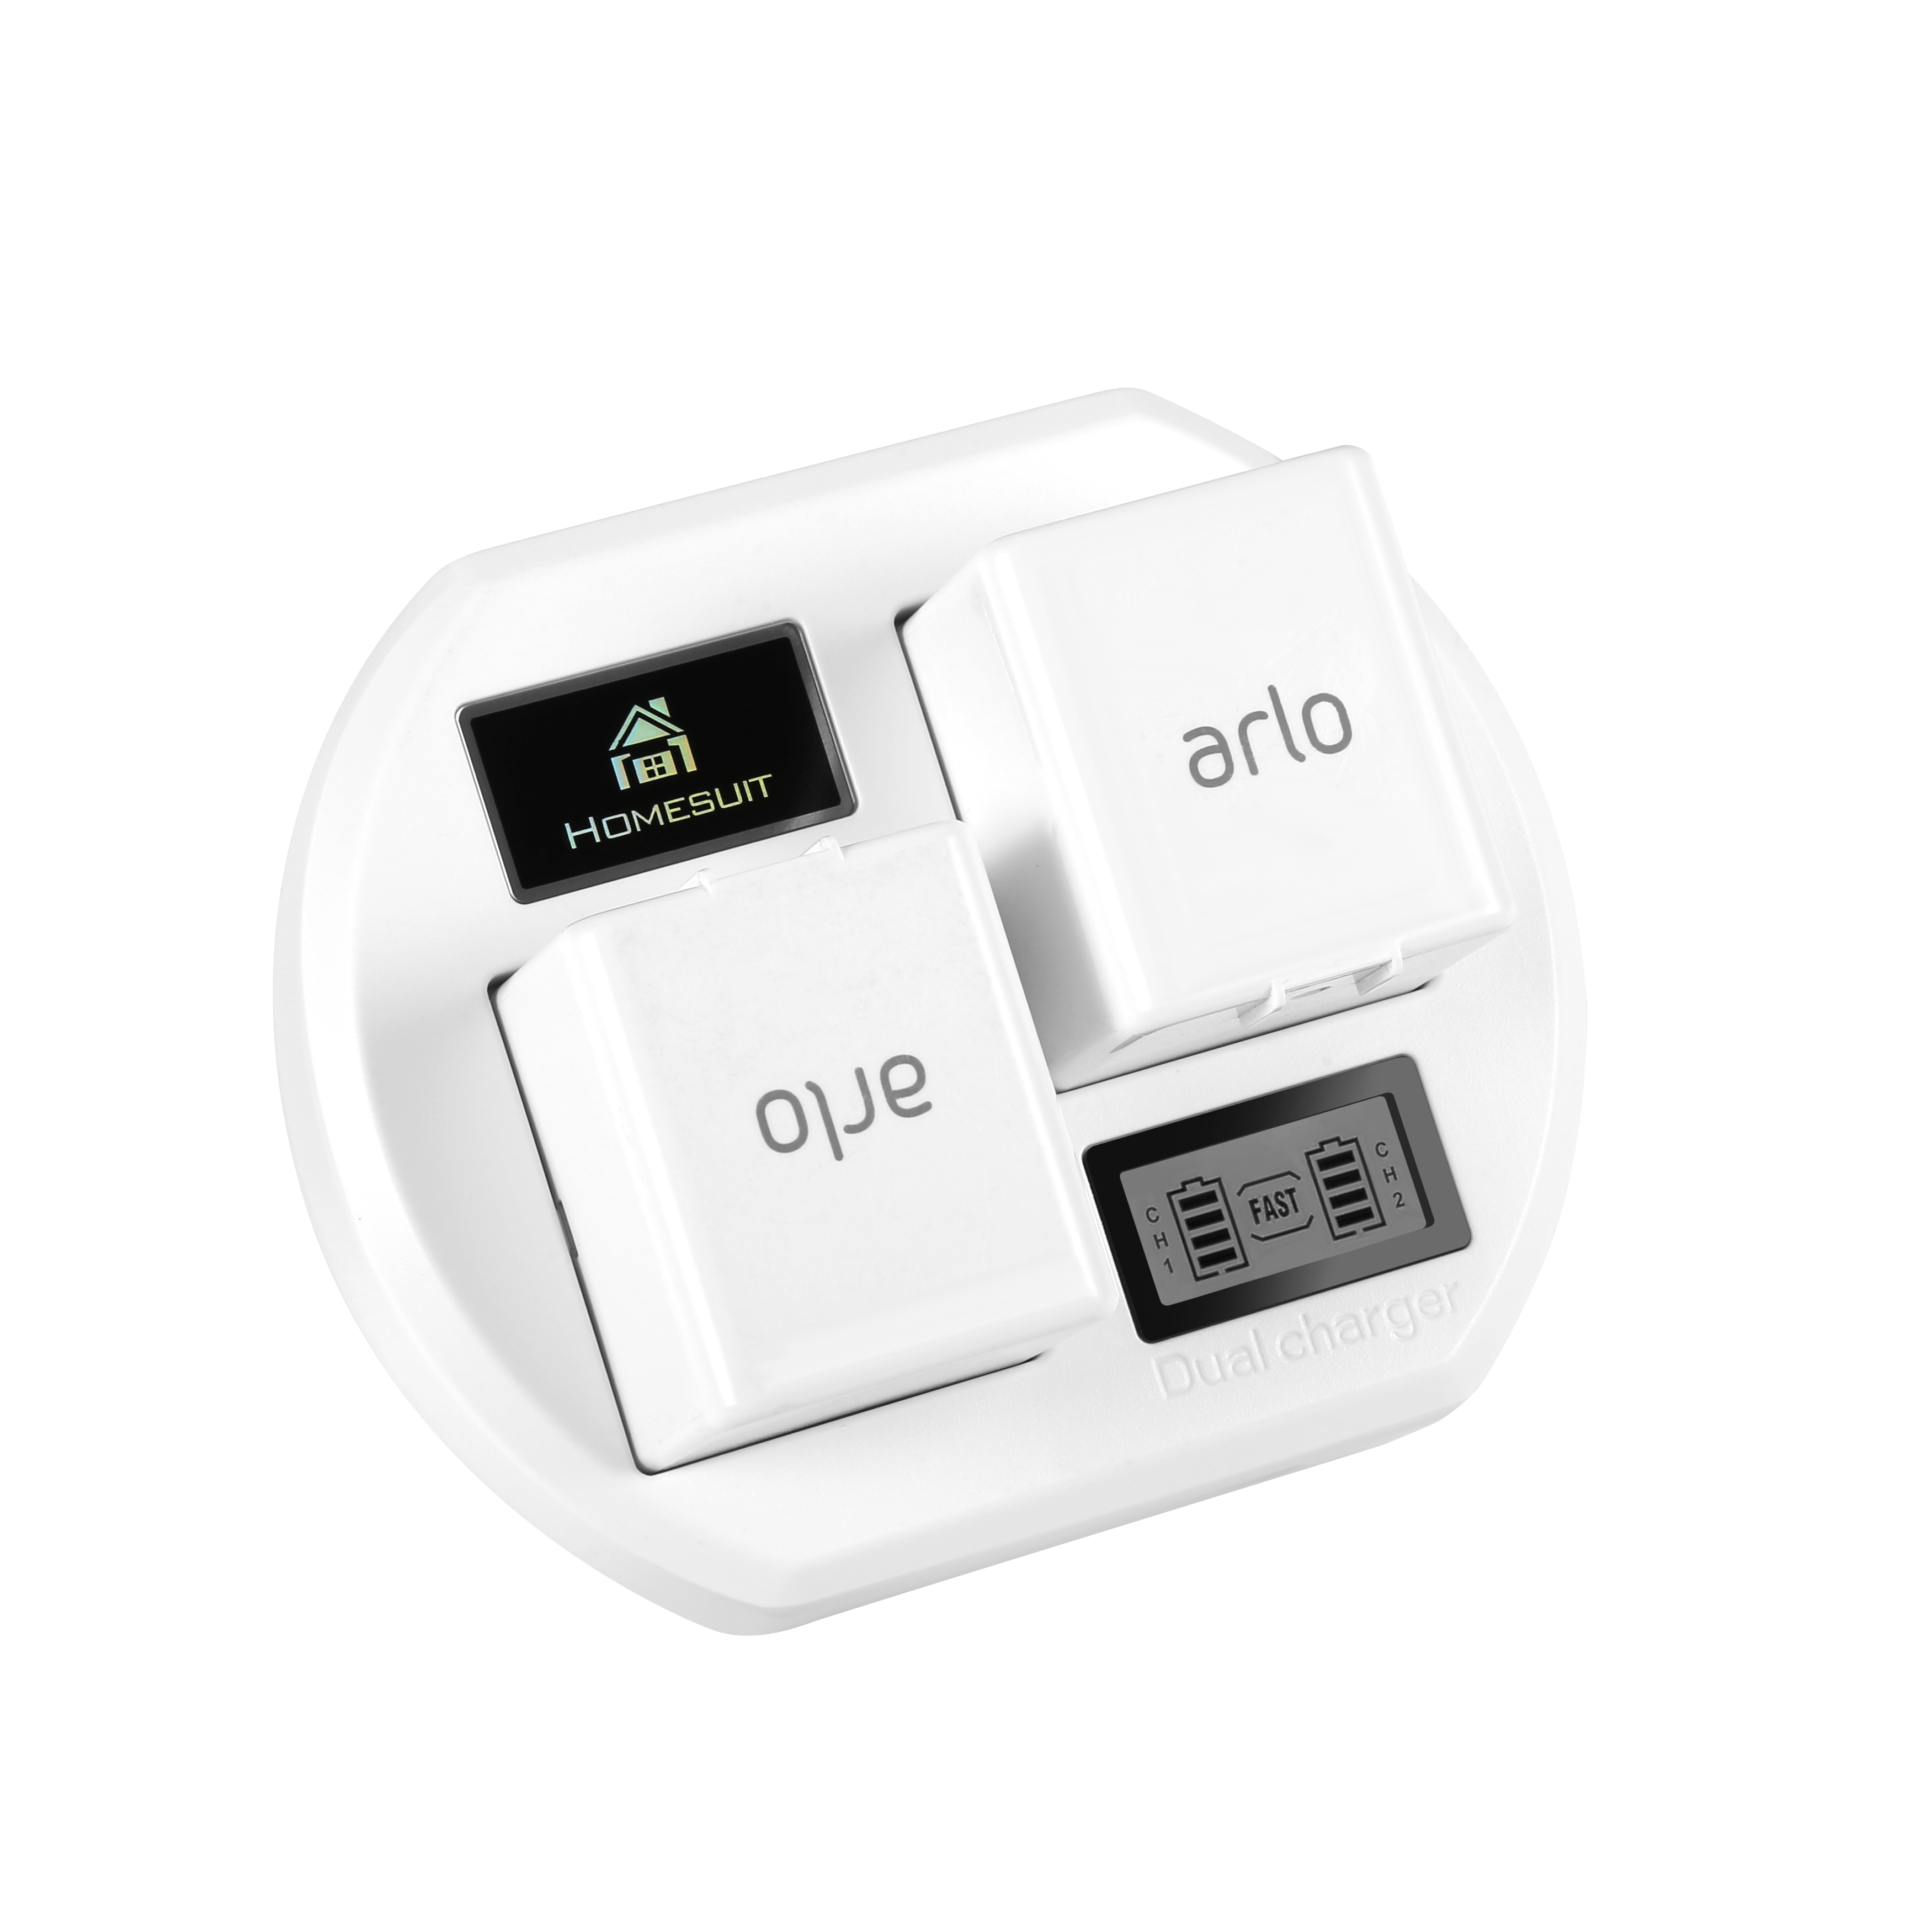 Station Compatible Arlo Rechargable Batteries, Arua LCD Display Charger Compatible Arlo Light & Arlo Pro Smart Home Cameras & Arlo Pro 2 & Arlo Batteries VMA4410 ALS1101 (White)